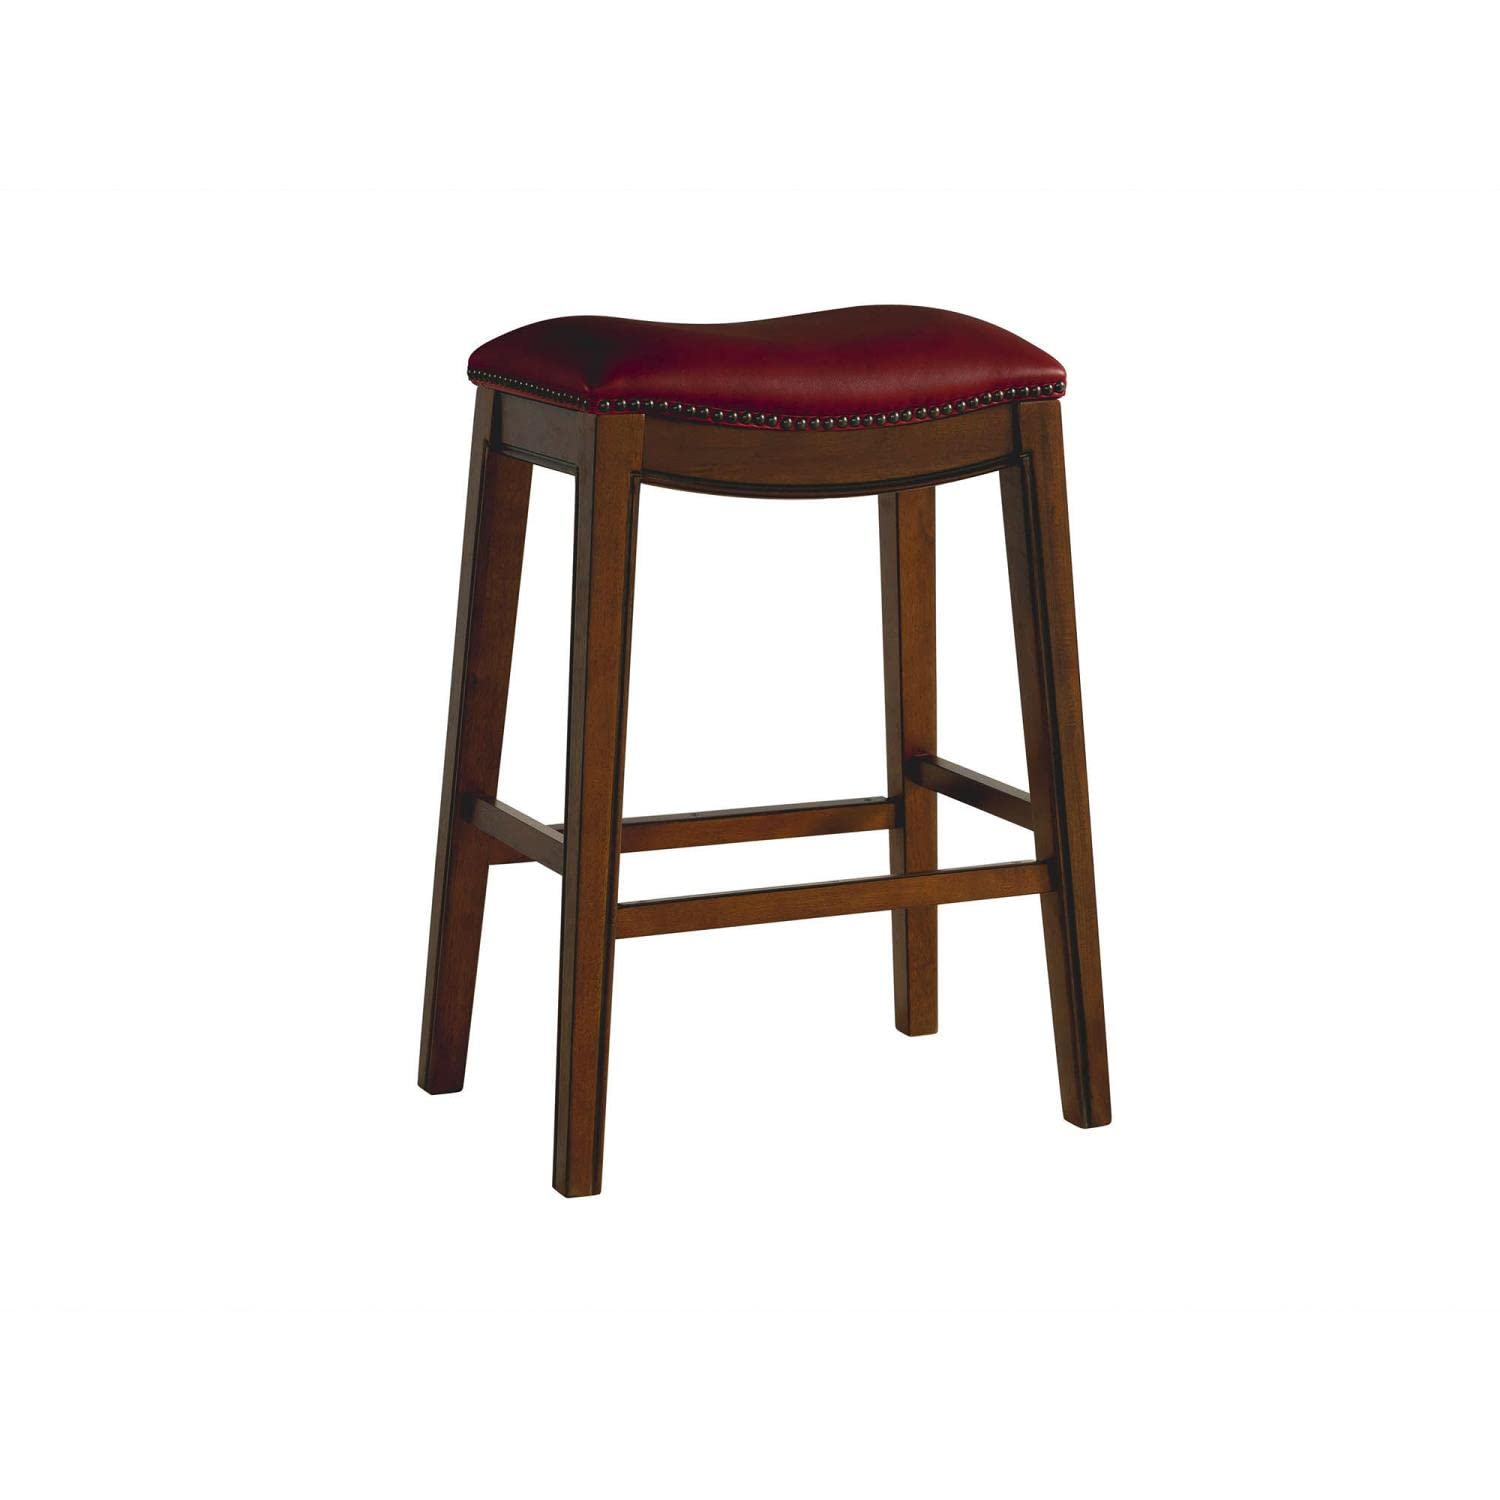 Picket House Furnishings Bowen 30" Backless Bar Stool in Red